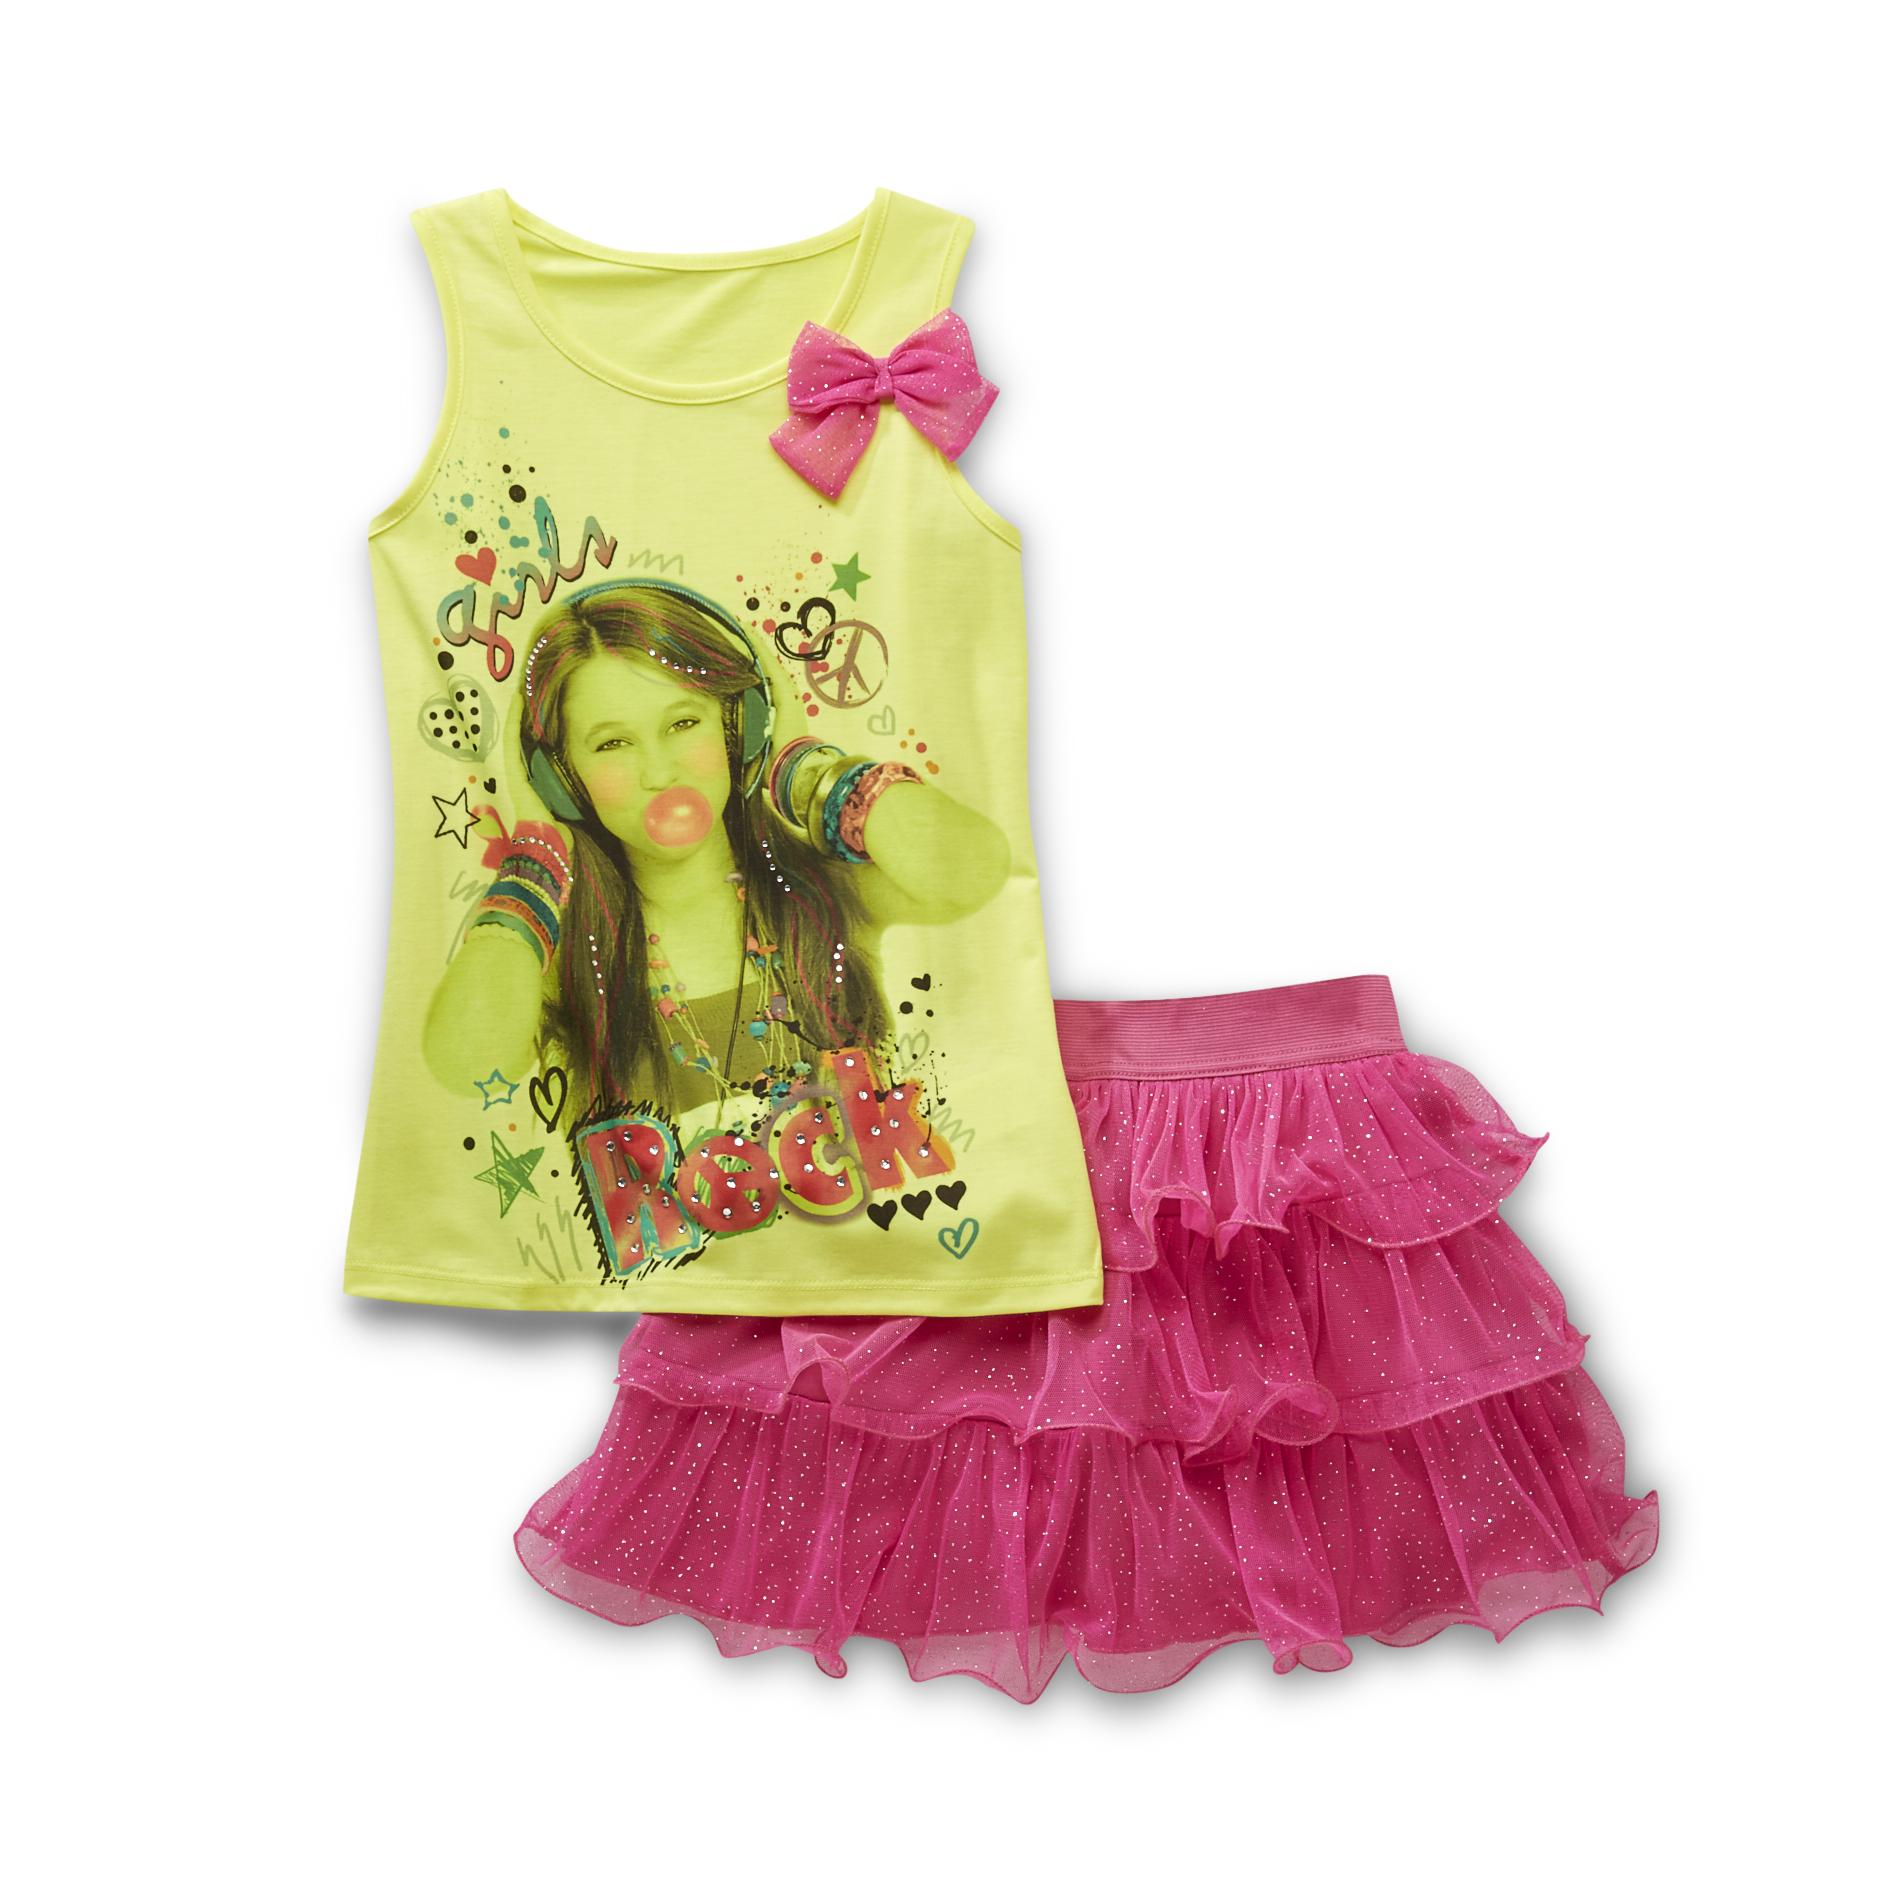 Piper Girl's Graphic Tank Top & Skirt - Studded